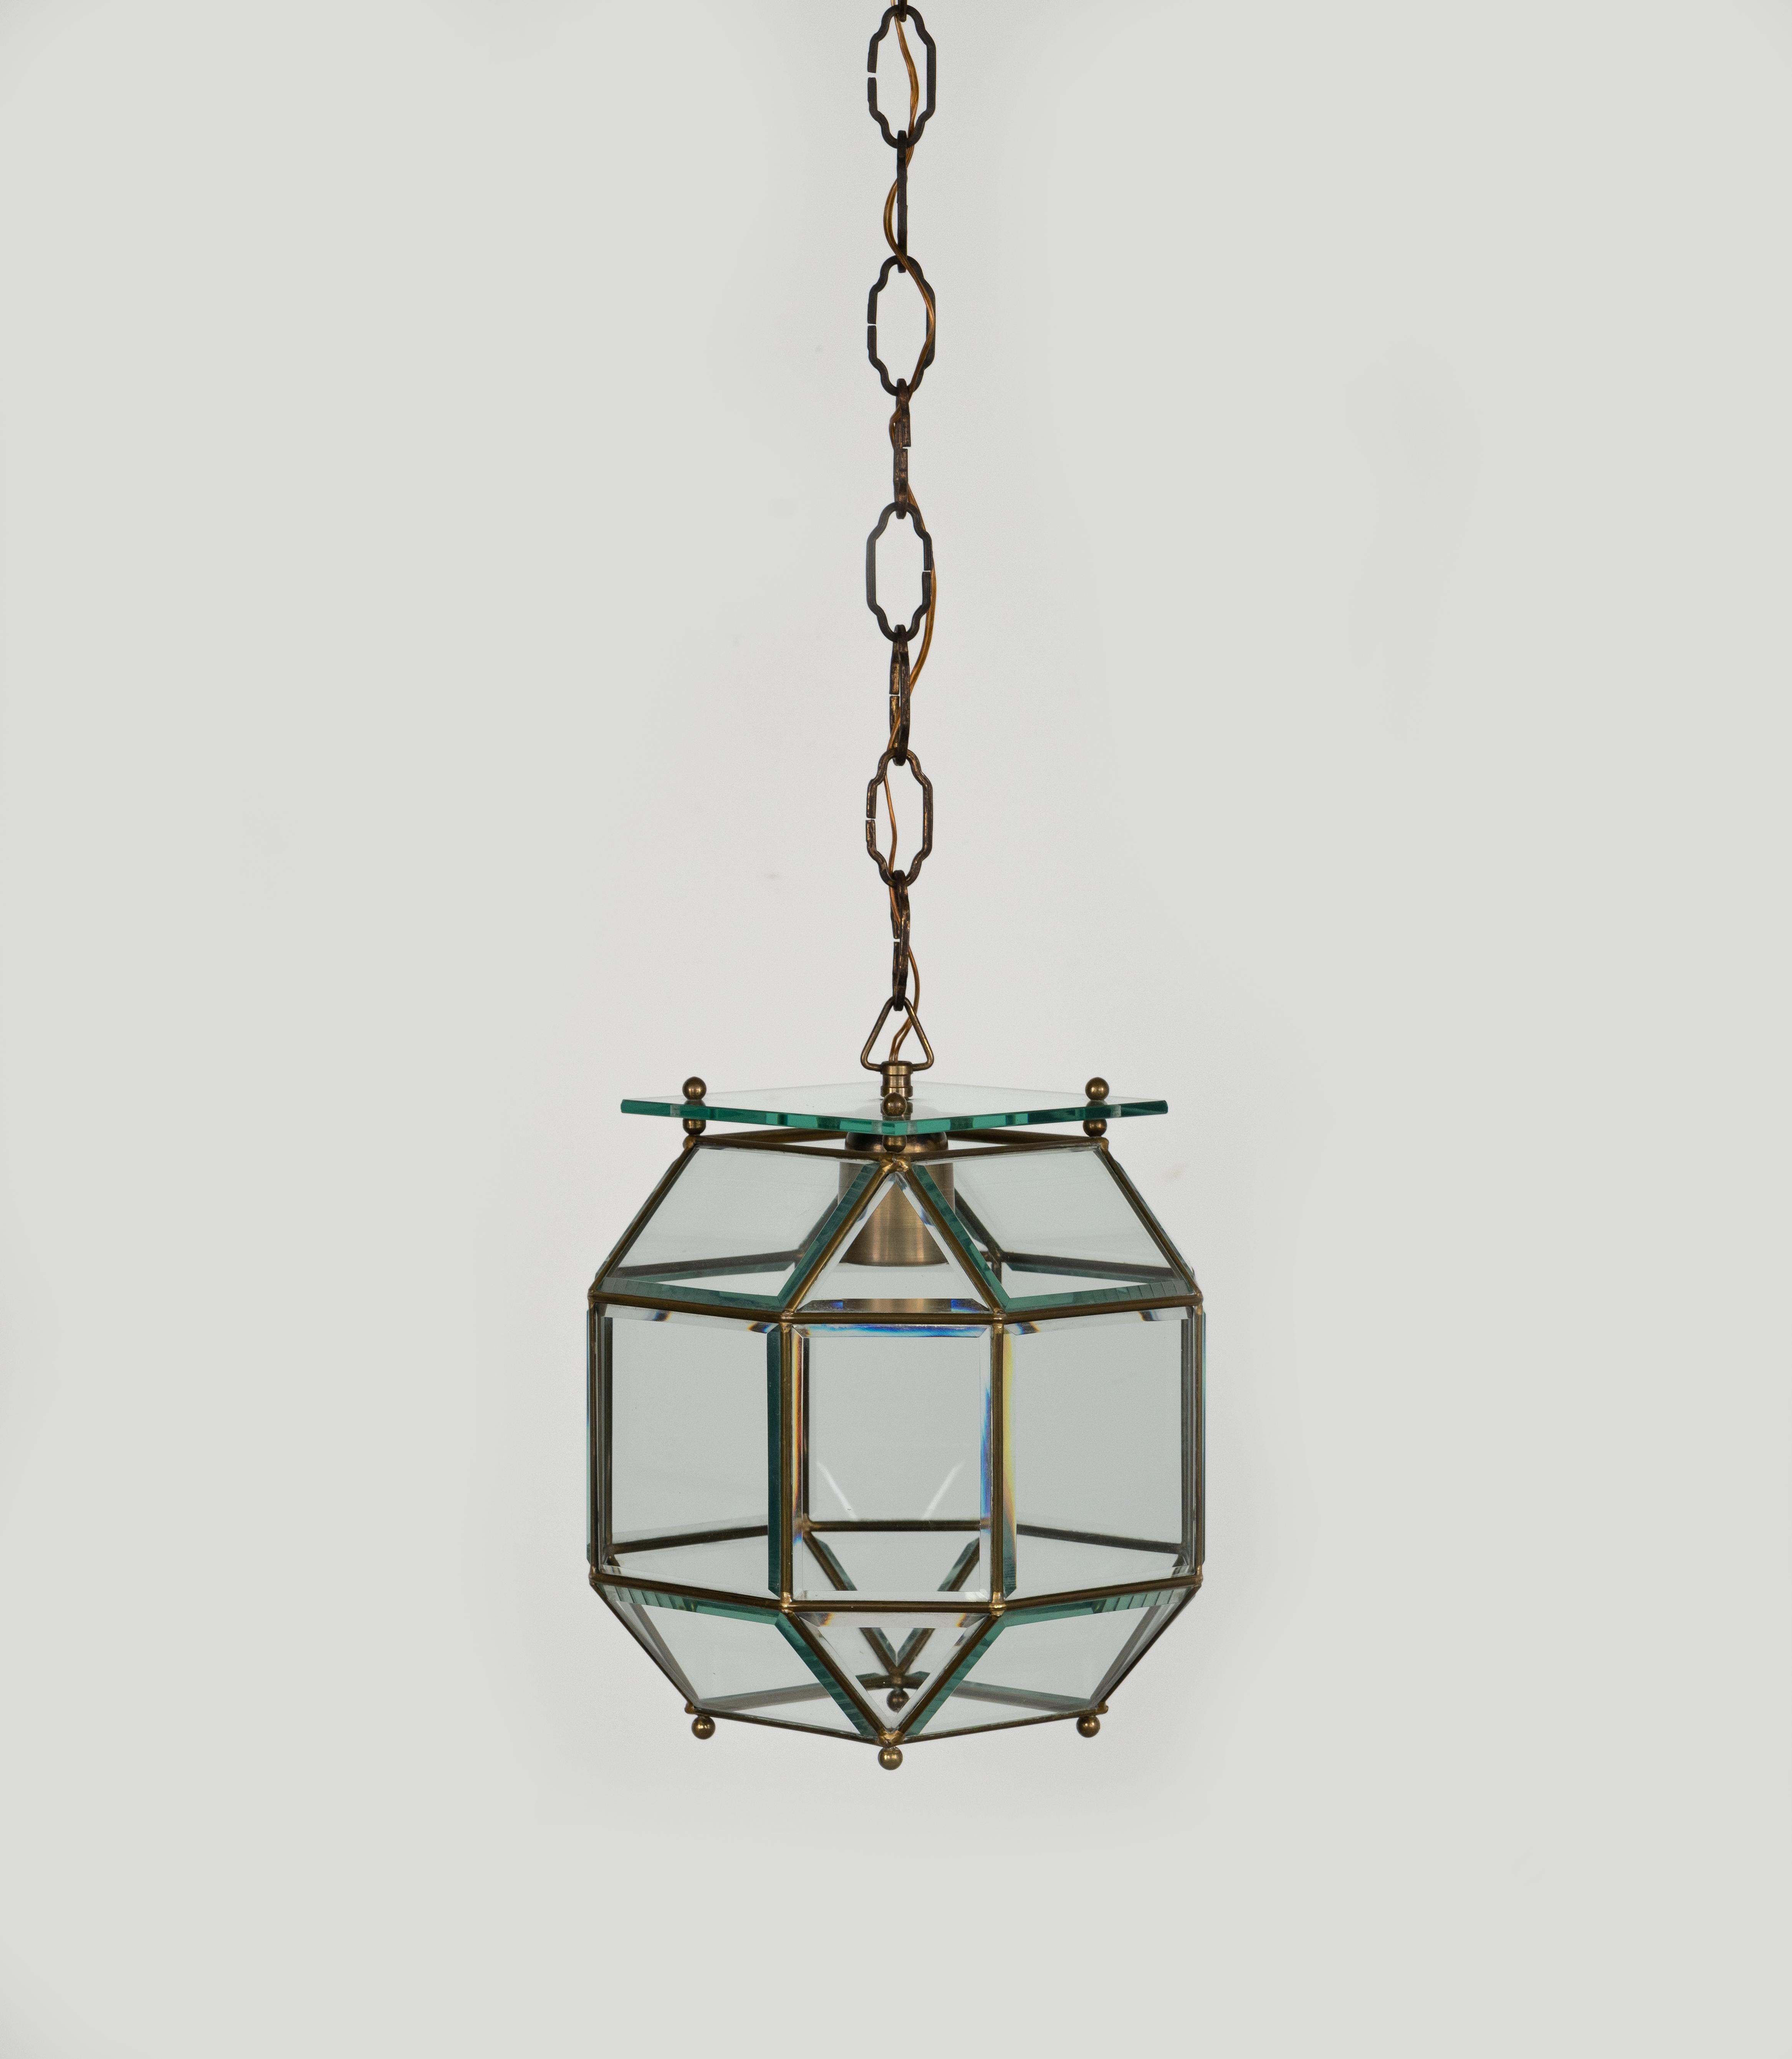 Italian Midcentury Chandelier in Brass and Beveled Glass Adolf Loos Style, Italy 1950s For Sale